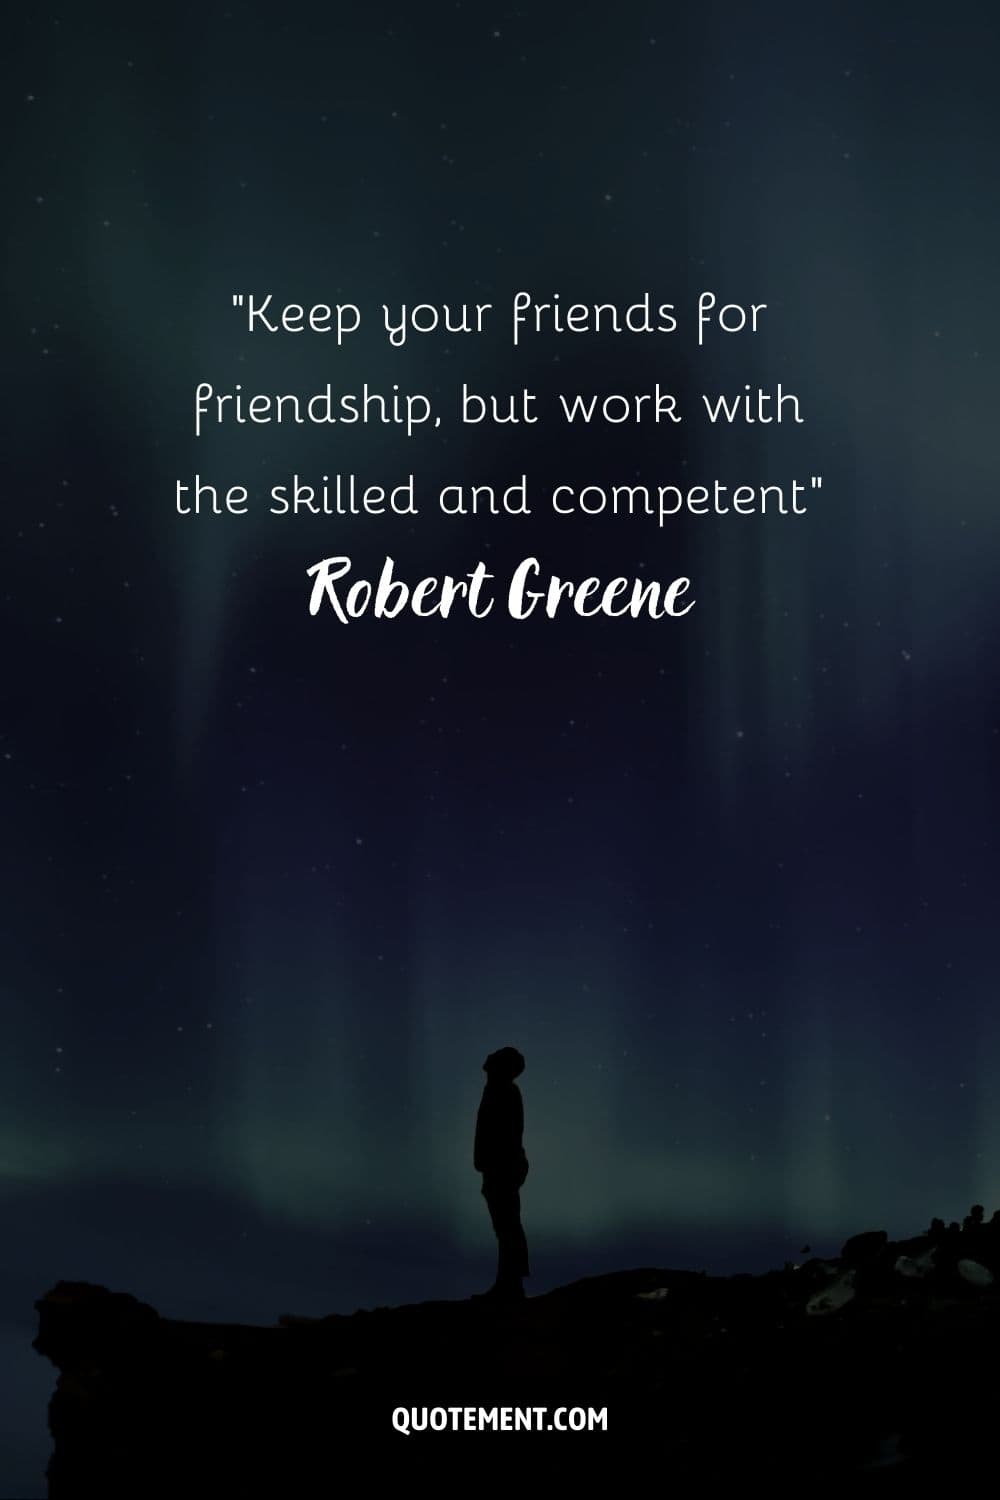 “Keep your friends for friendship, but work with the skilled and competent” ― Robert Greene, The 48 Laws of Power